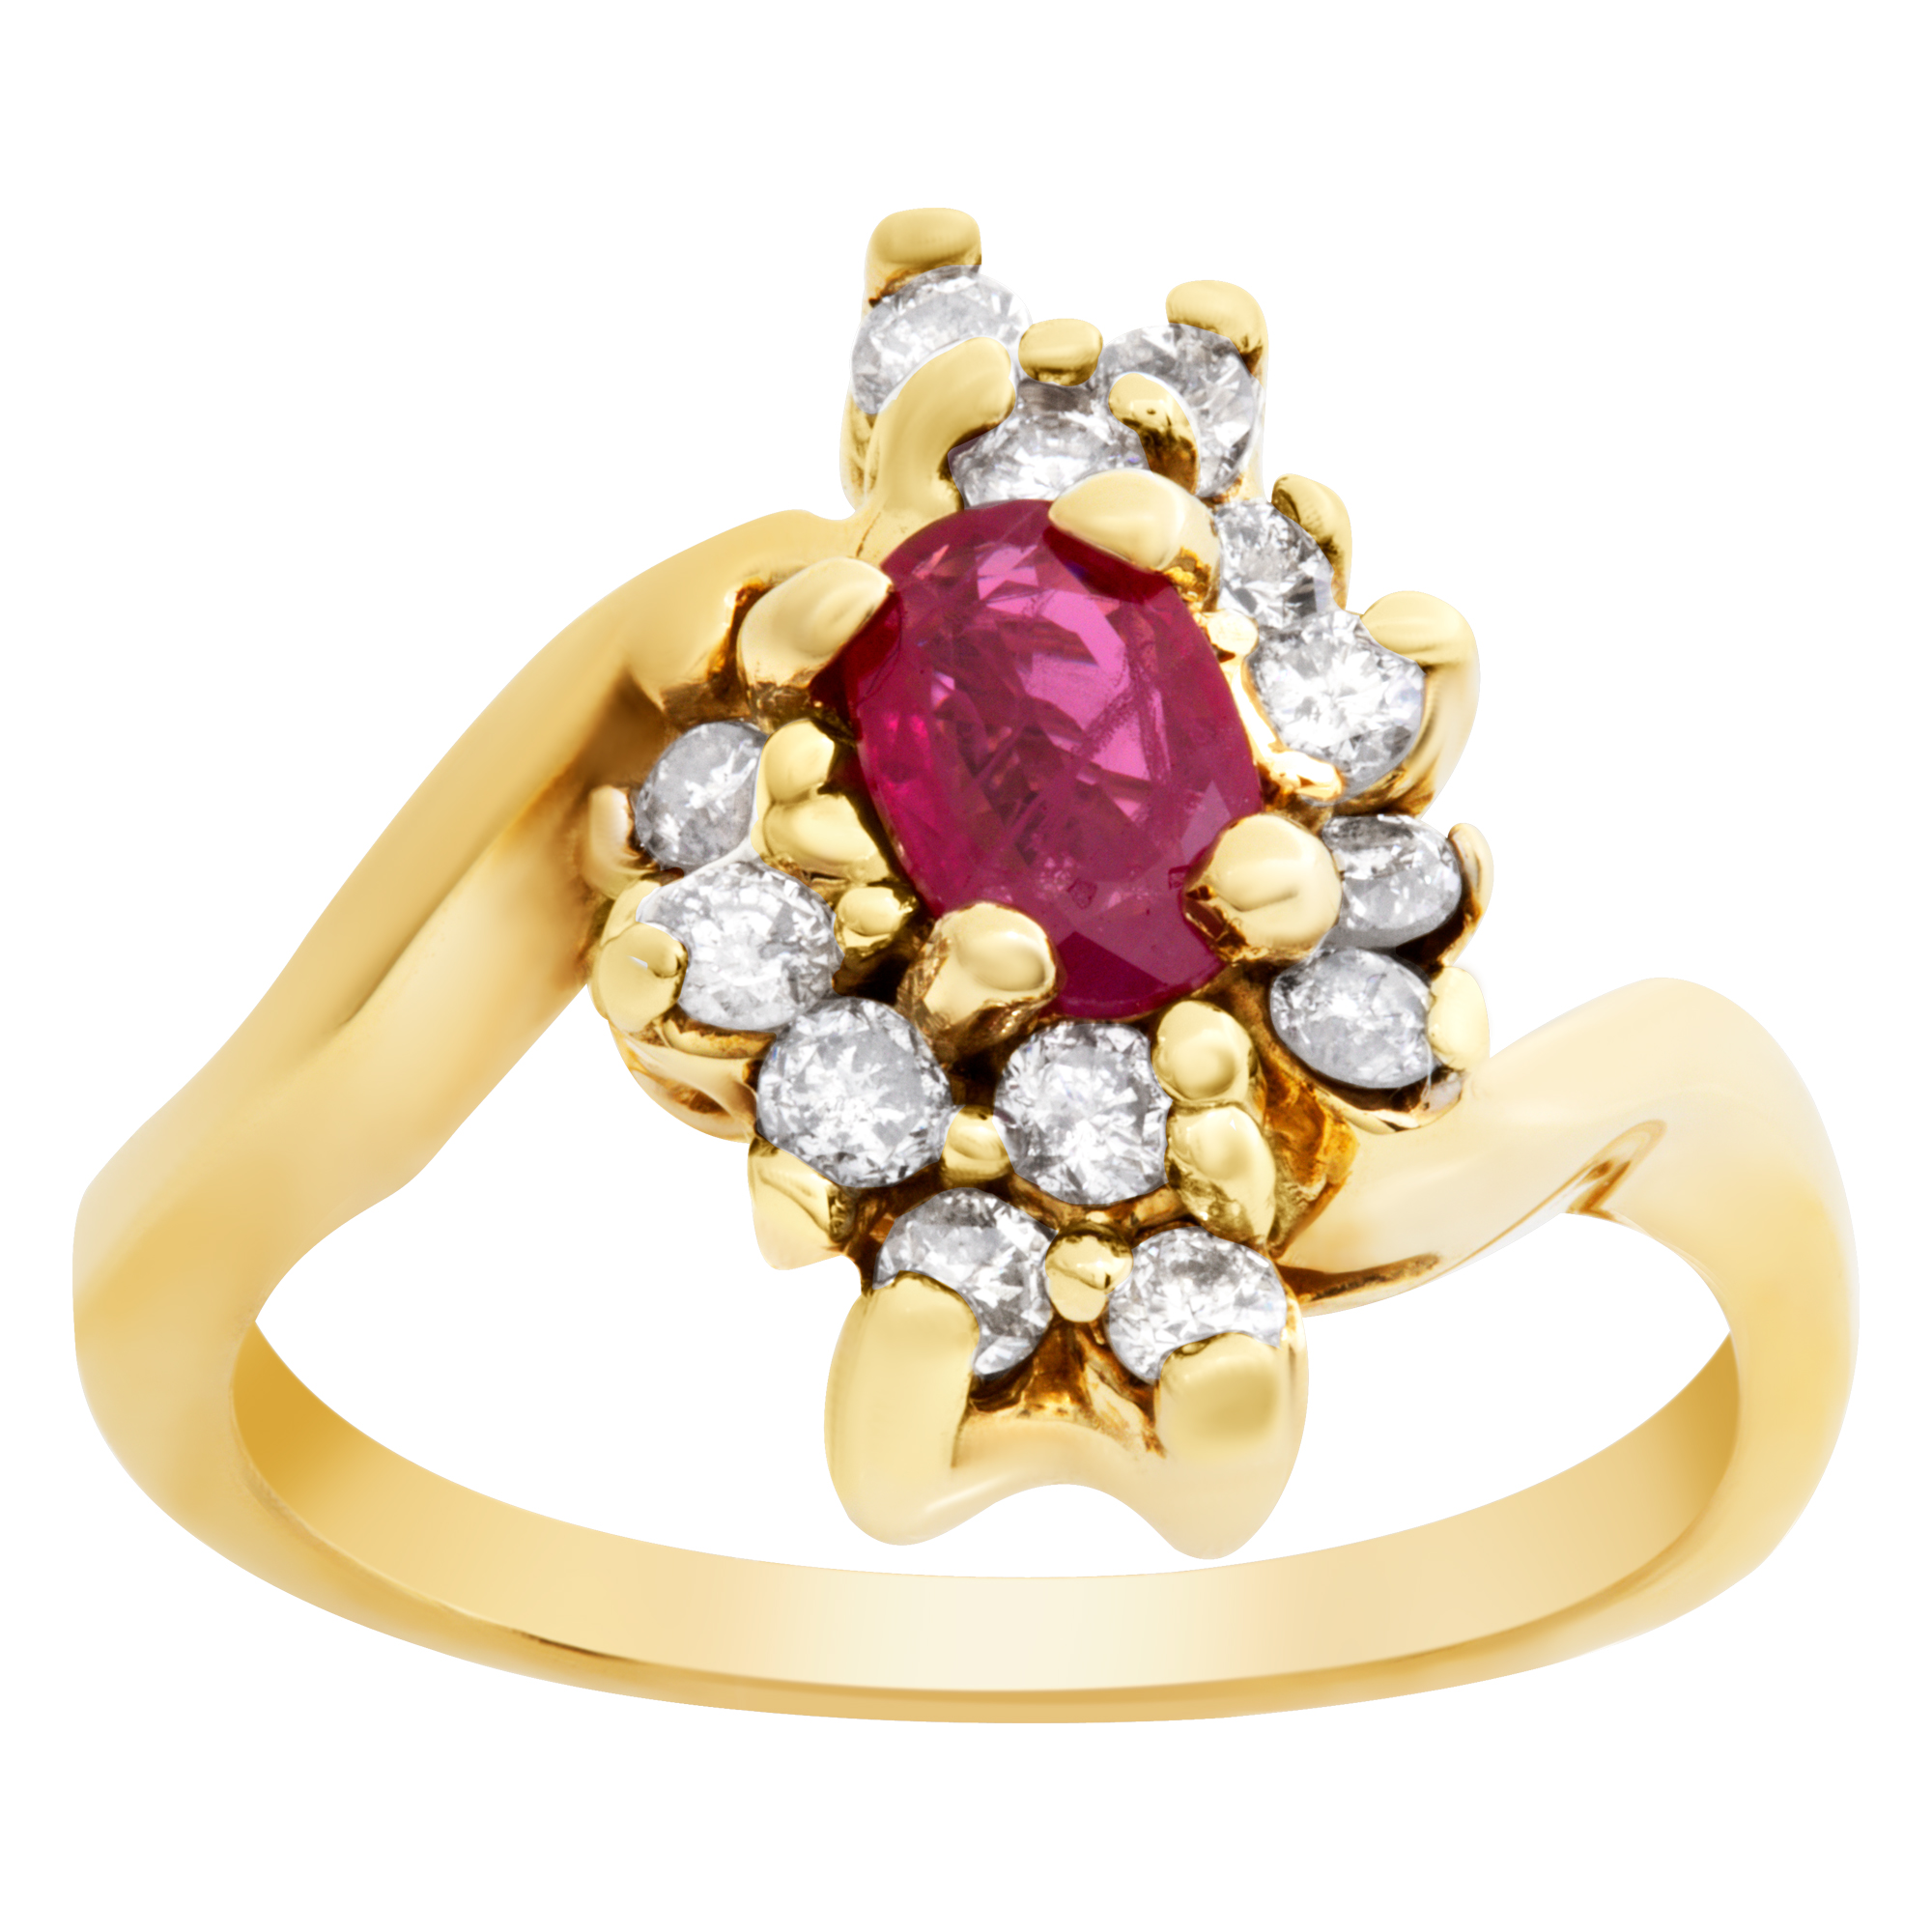 Oval ruby and diamond ring 18k yellow gold. Size 6 image 1